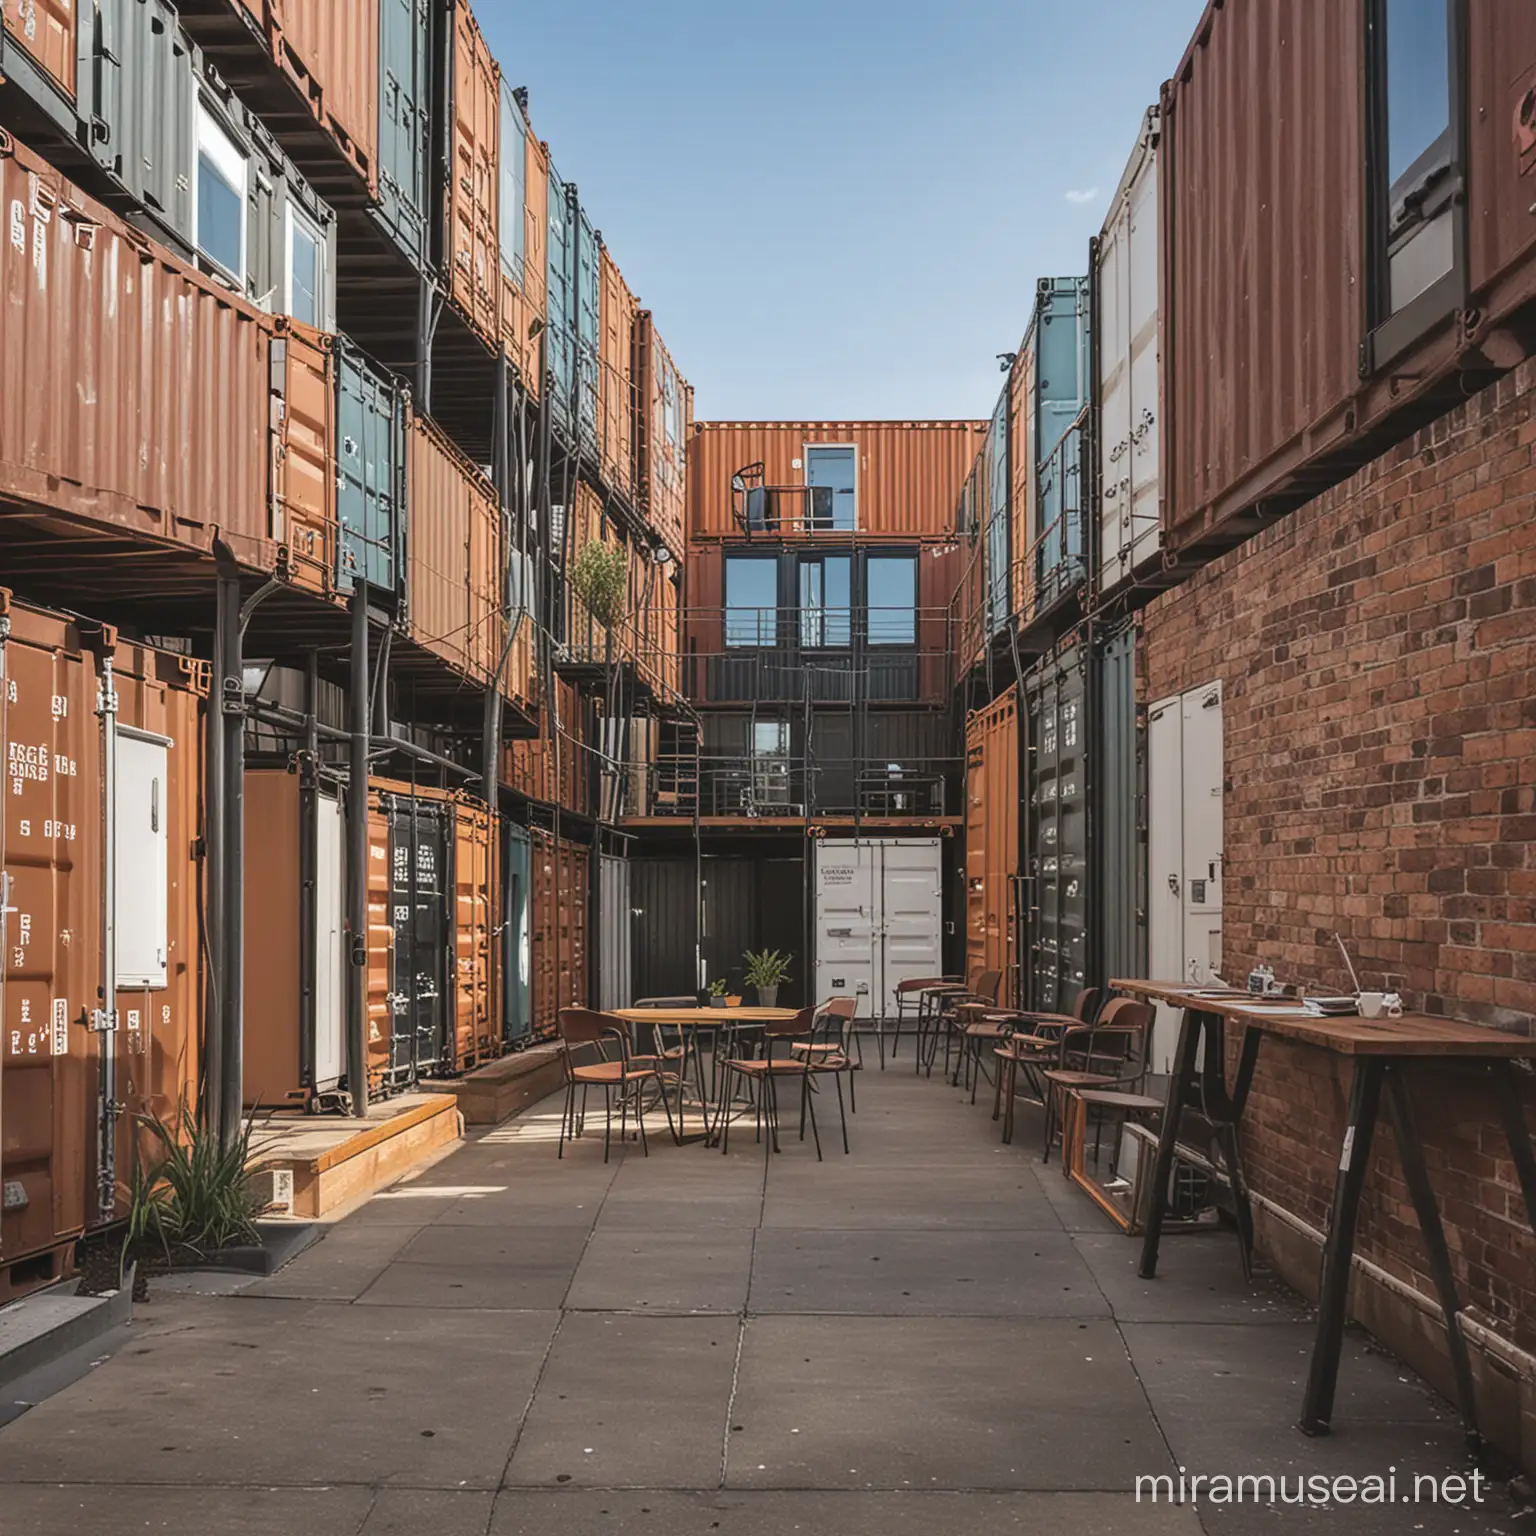 Vibrant Shipping Container Student Village